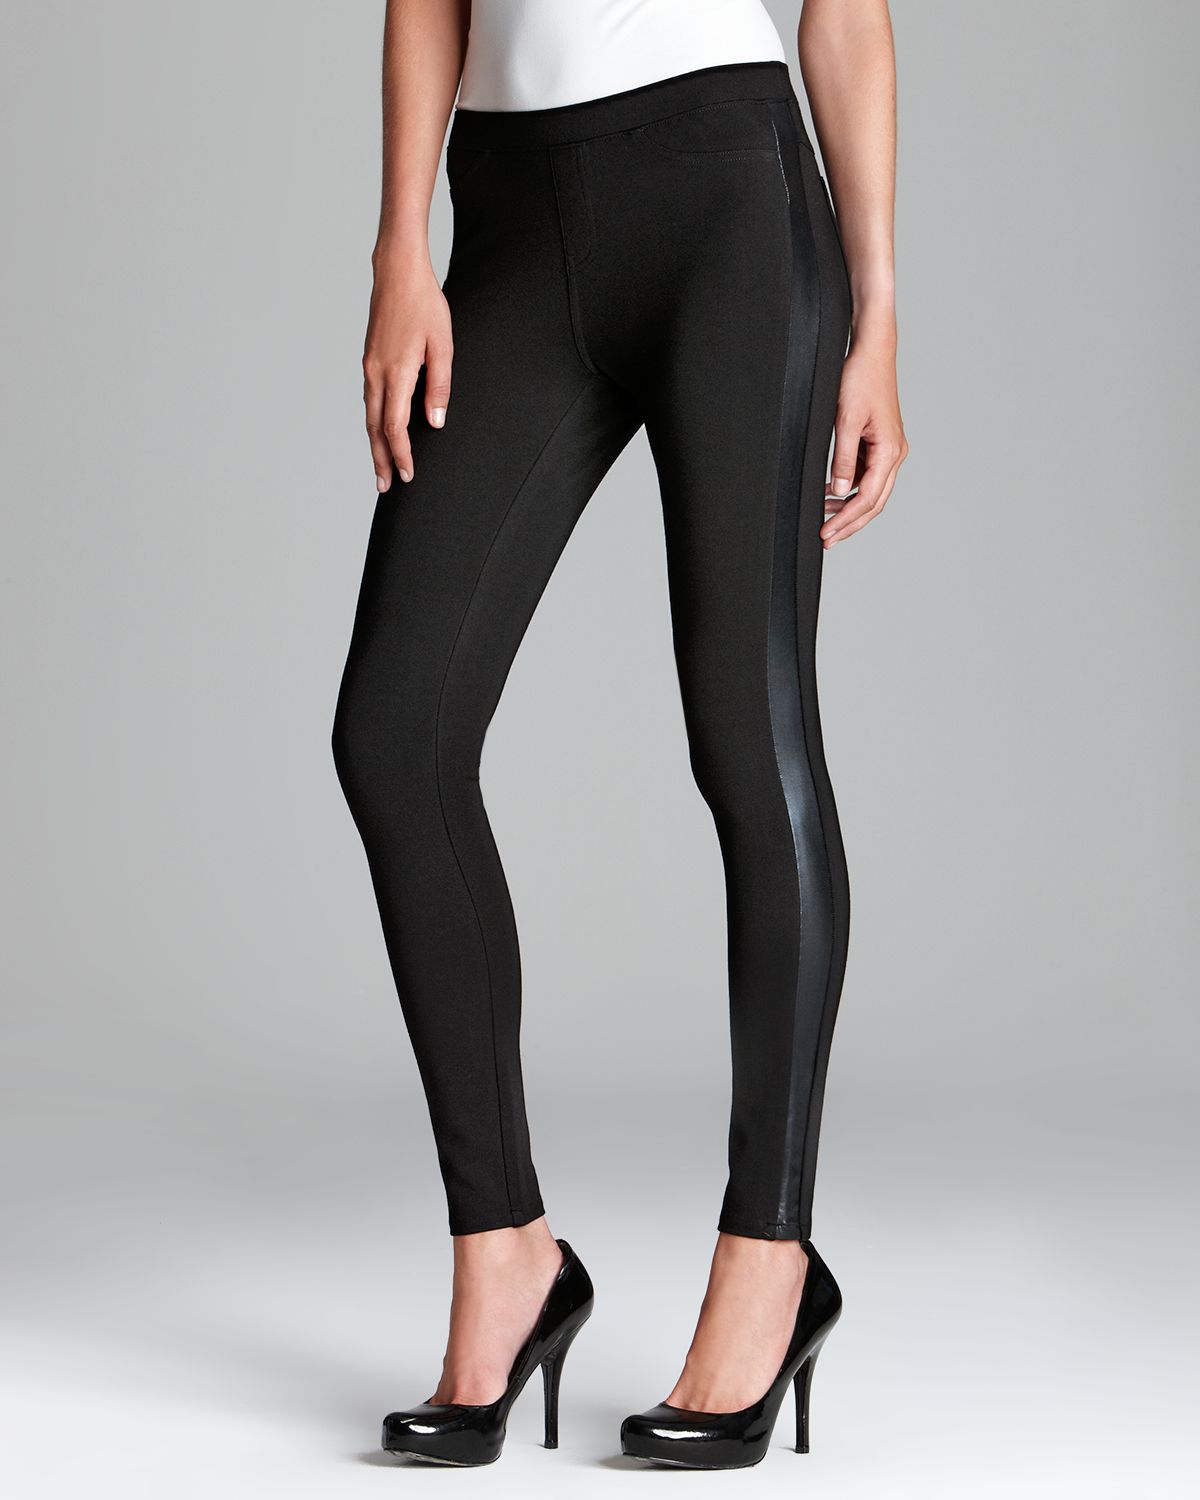 Demystifying the Vast World of Leggings: Ponte, 7/8, and Compression